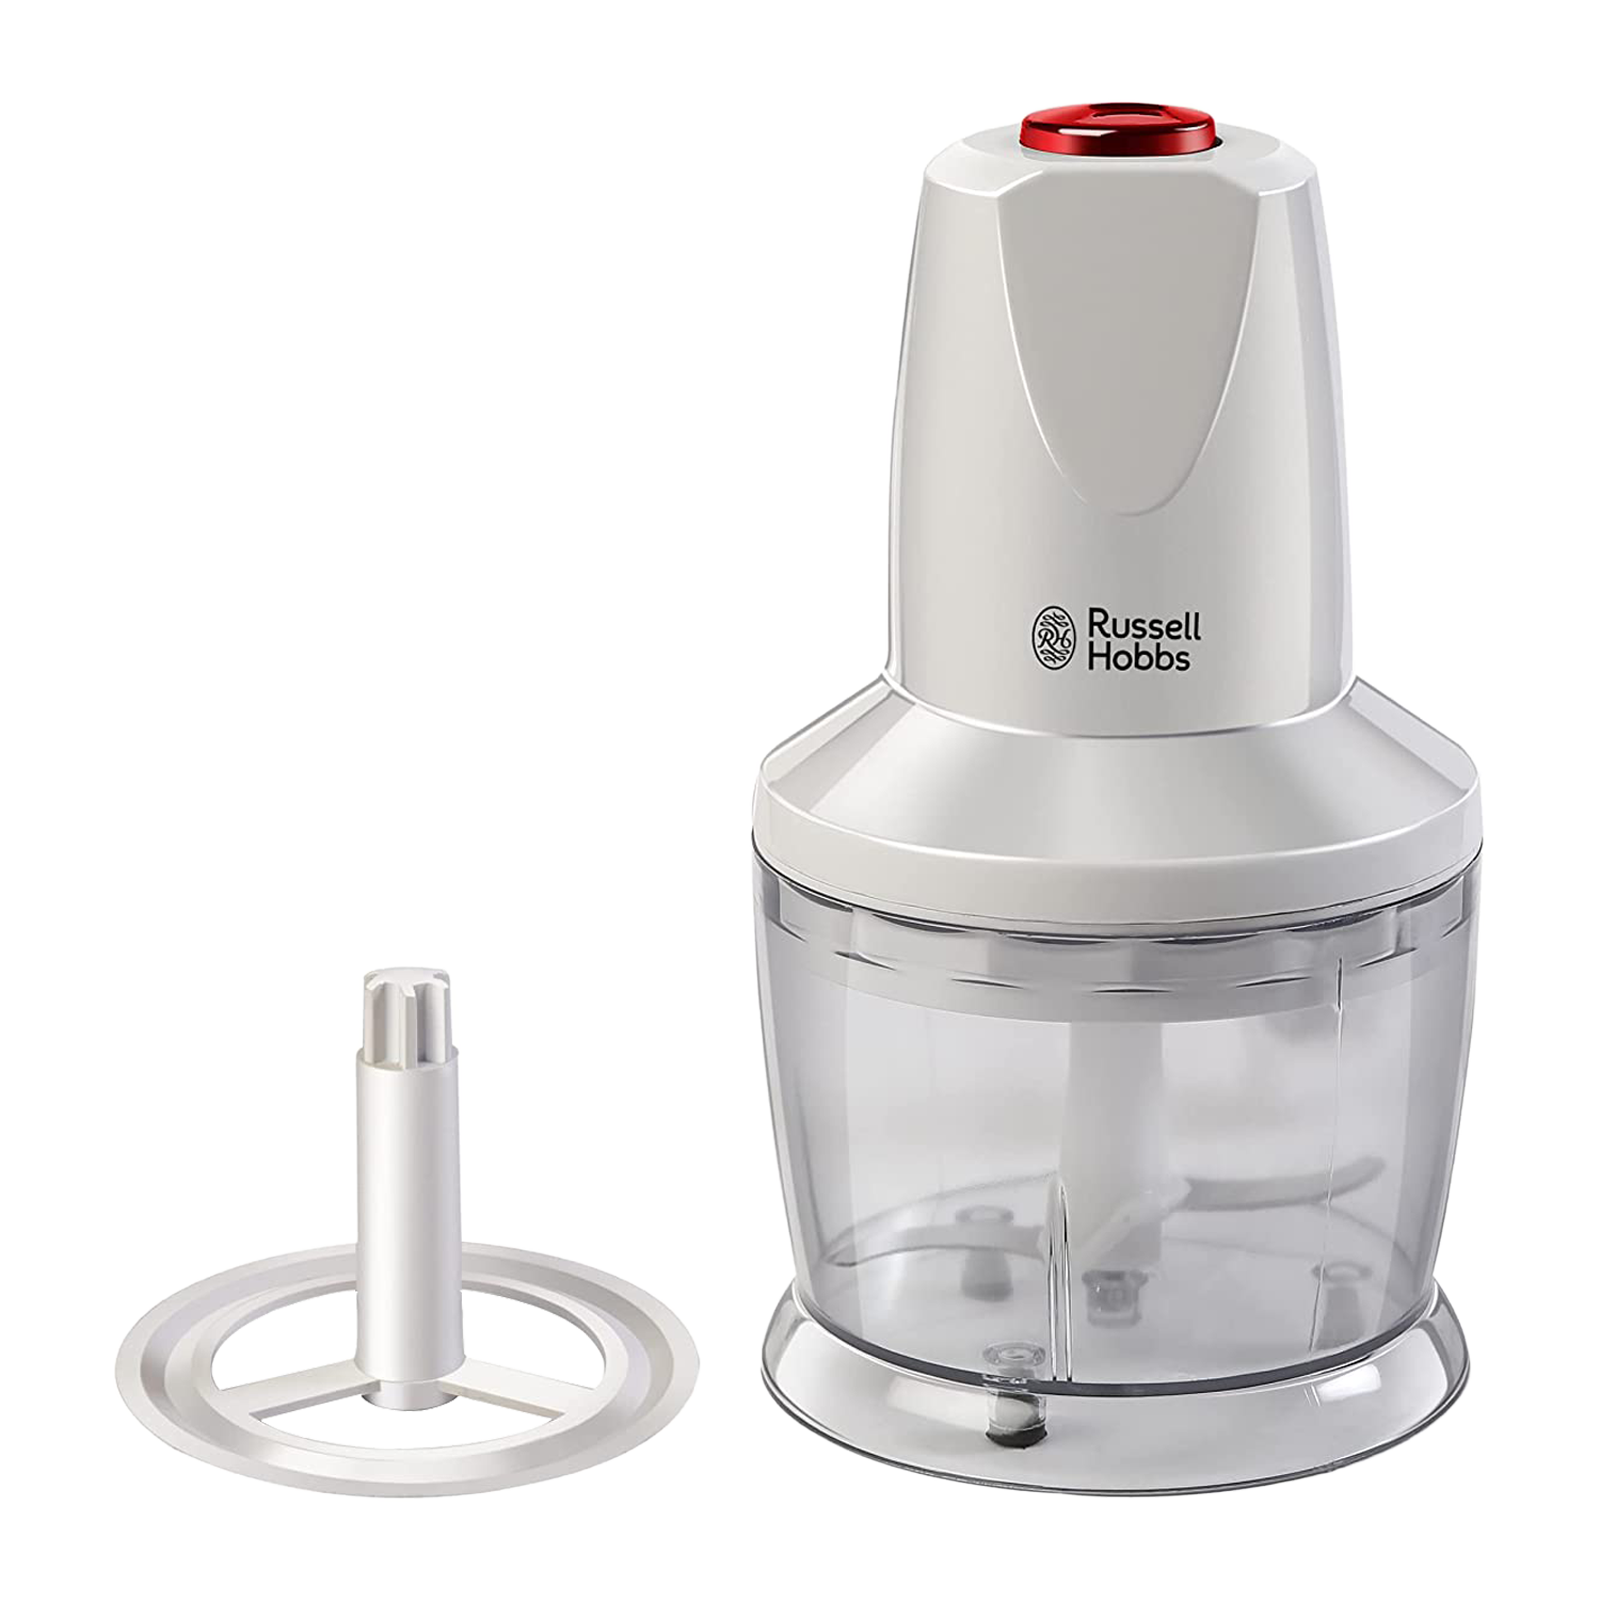 RUSSELL HOBBS 300 Watts 0.5 Litres Electric Chopper (Suitable for Fruits + Vegetable, 2 Blades, RCH300N, White)_1